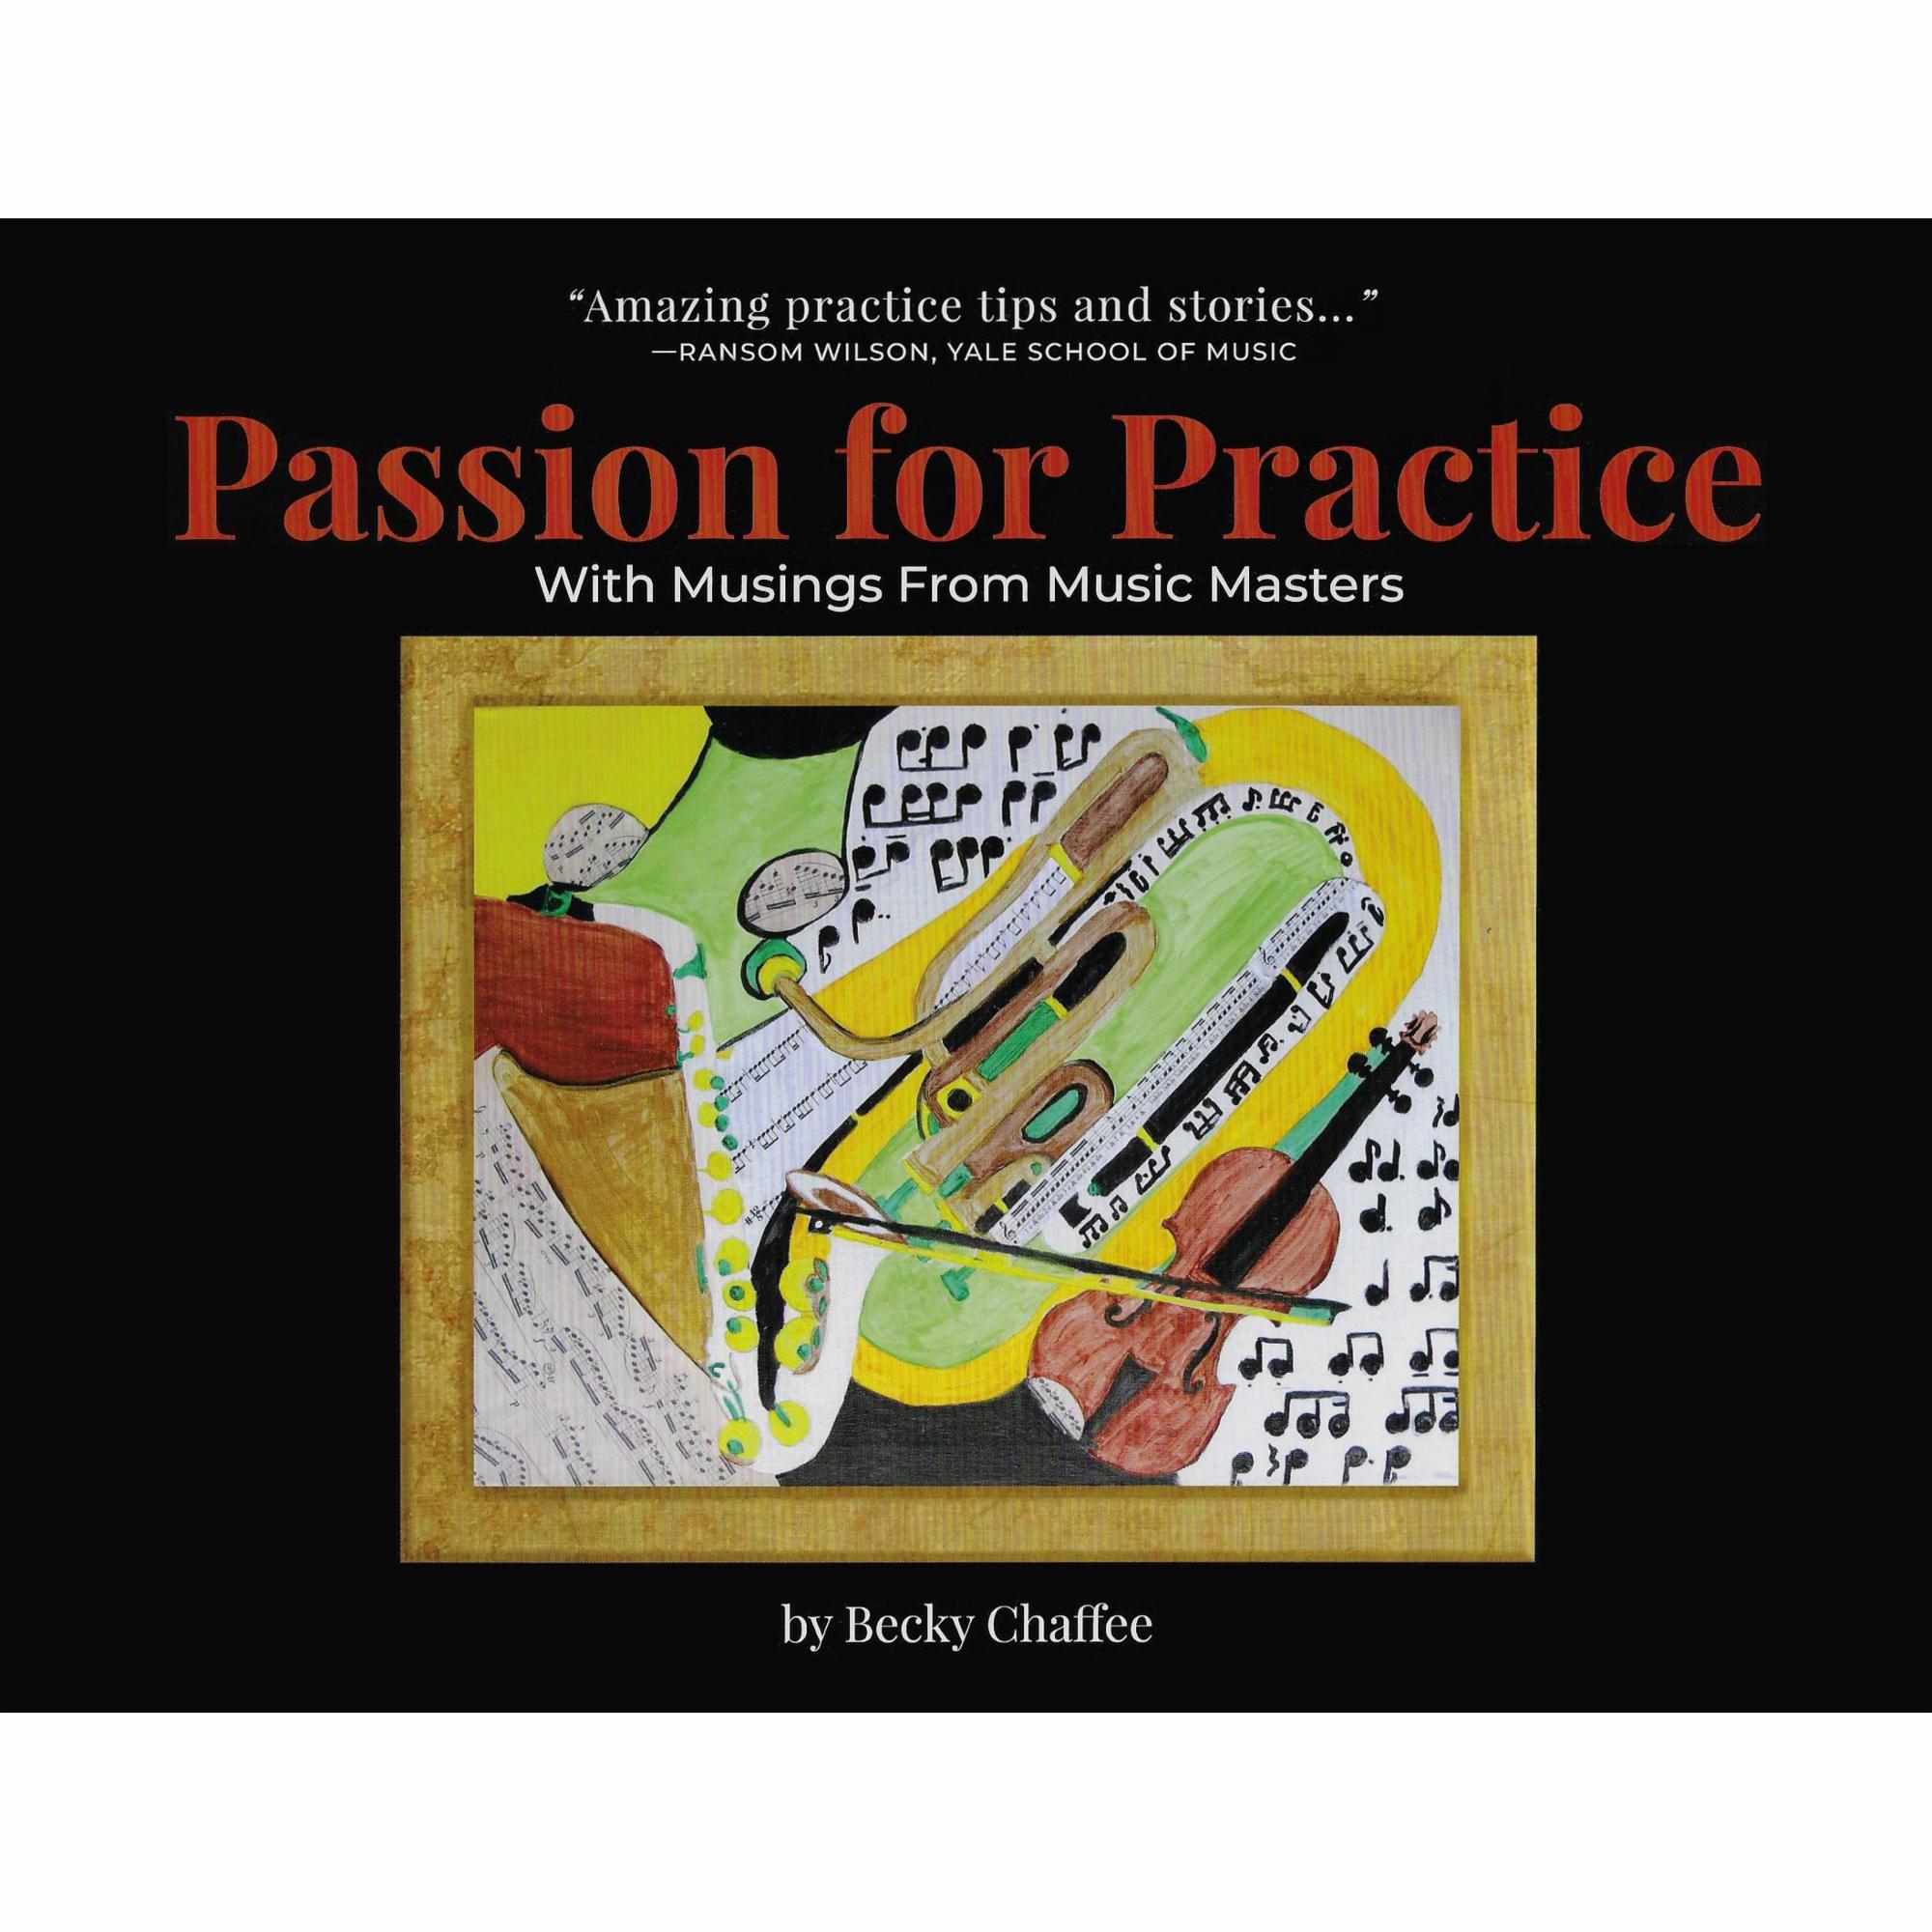 Passion for Practice (With Musings From Music Masters)